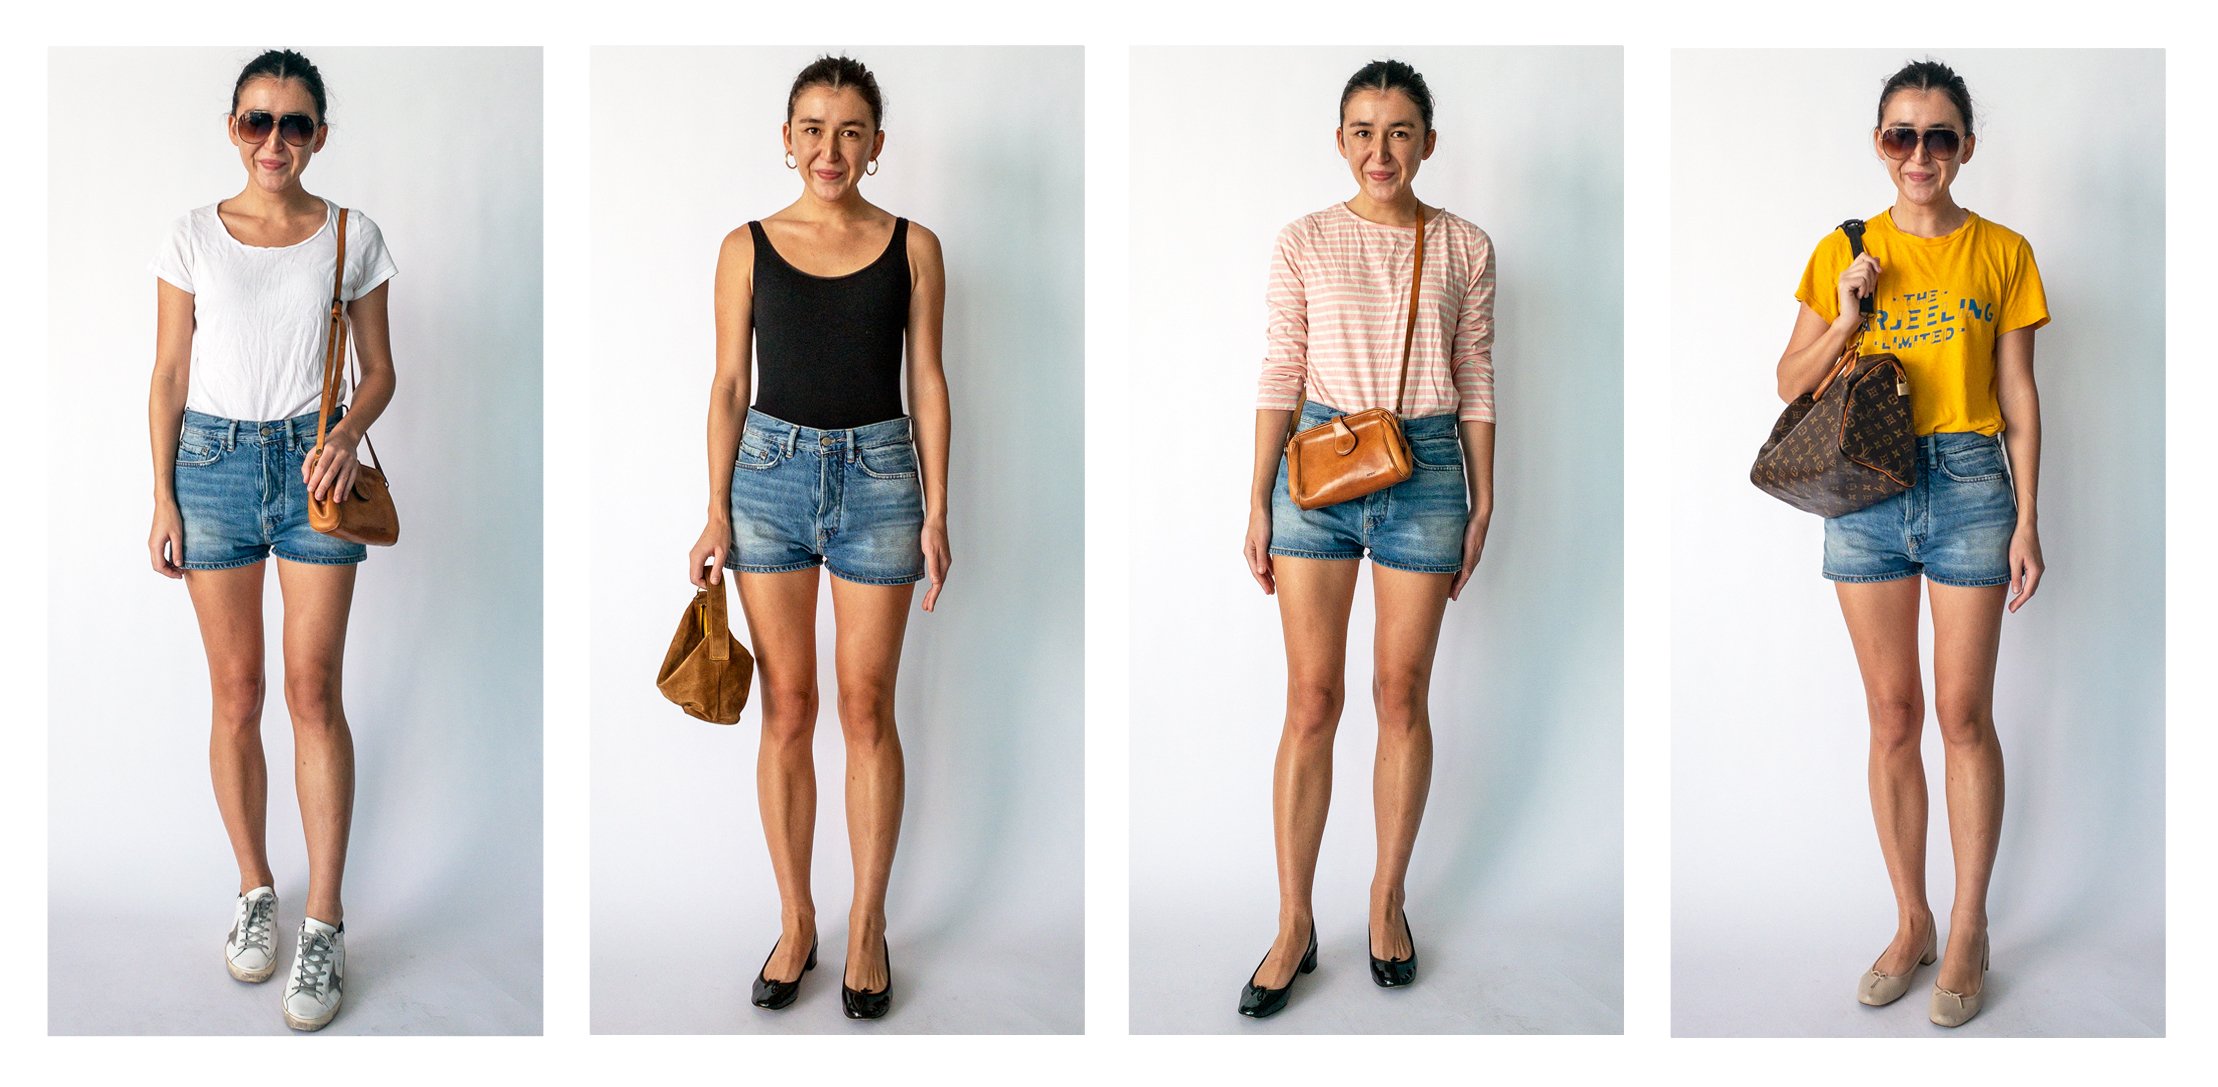 Acne Studios denim shorts review: Let's dig into their sizing